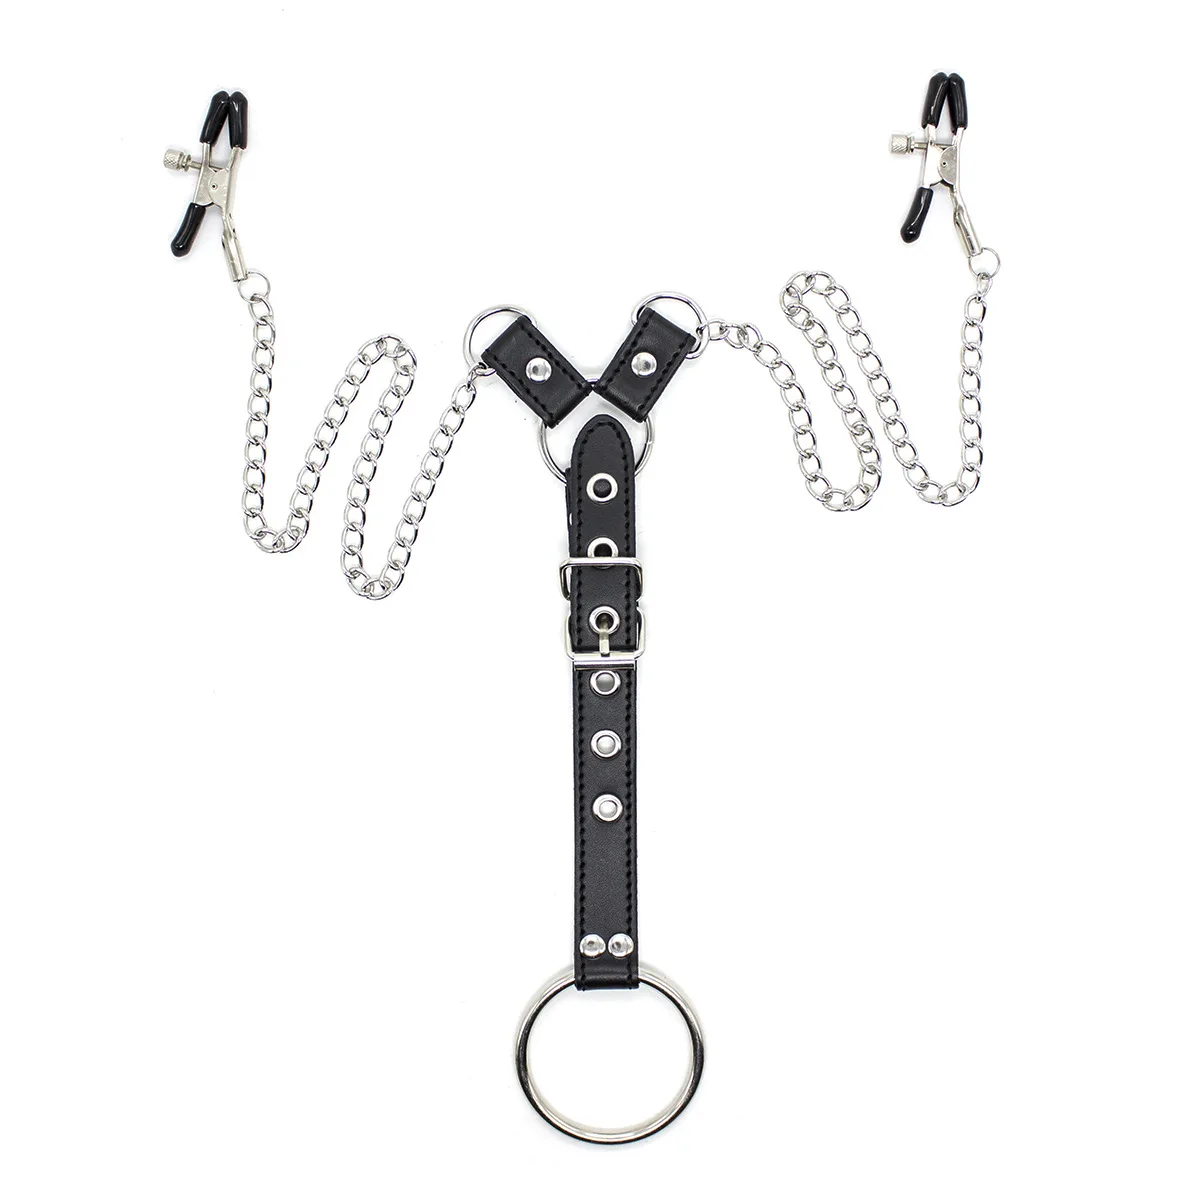 Bdsm Bondage Chain Nipple Clamps With Penis Ring Cock Rings For Men Sex Harness Restraints Adult